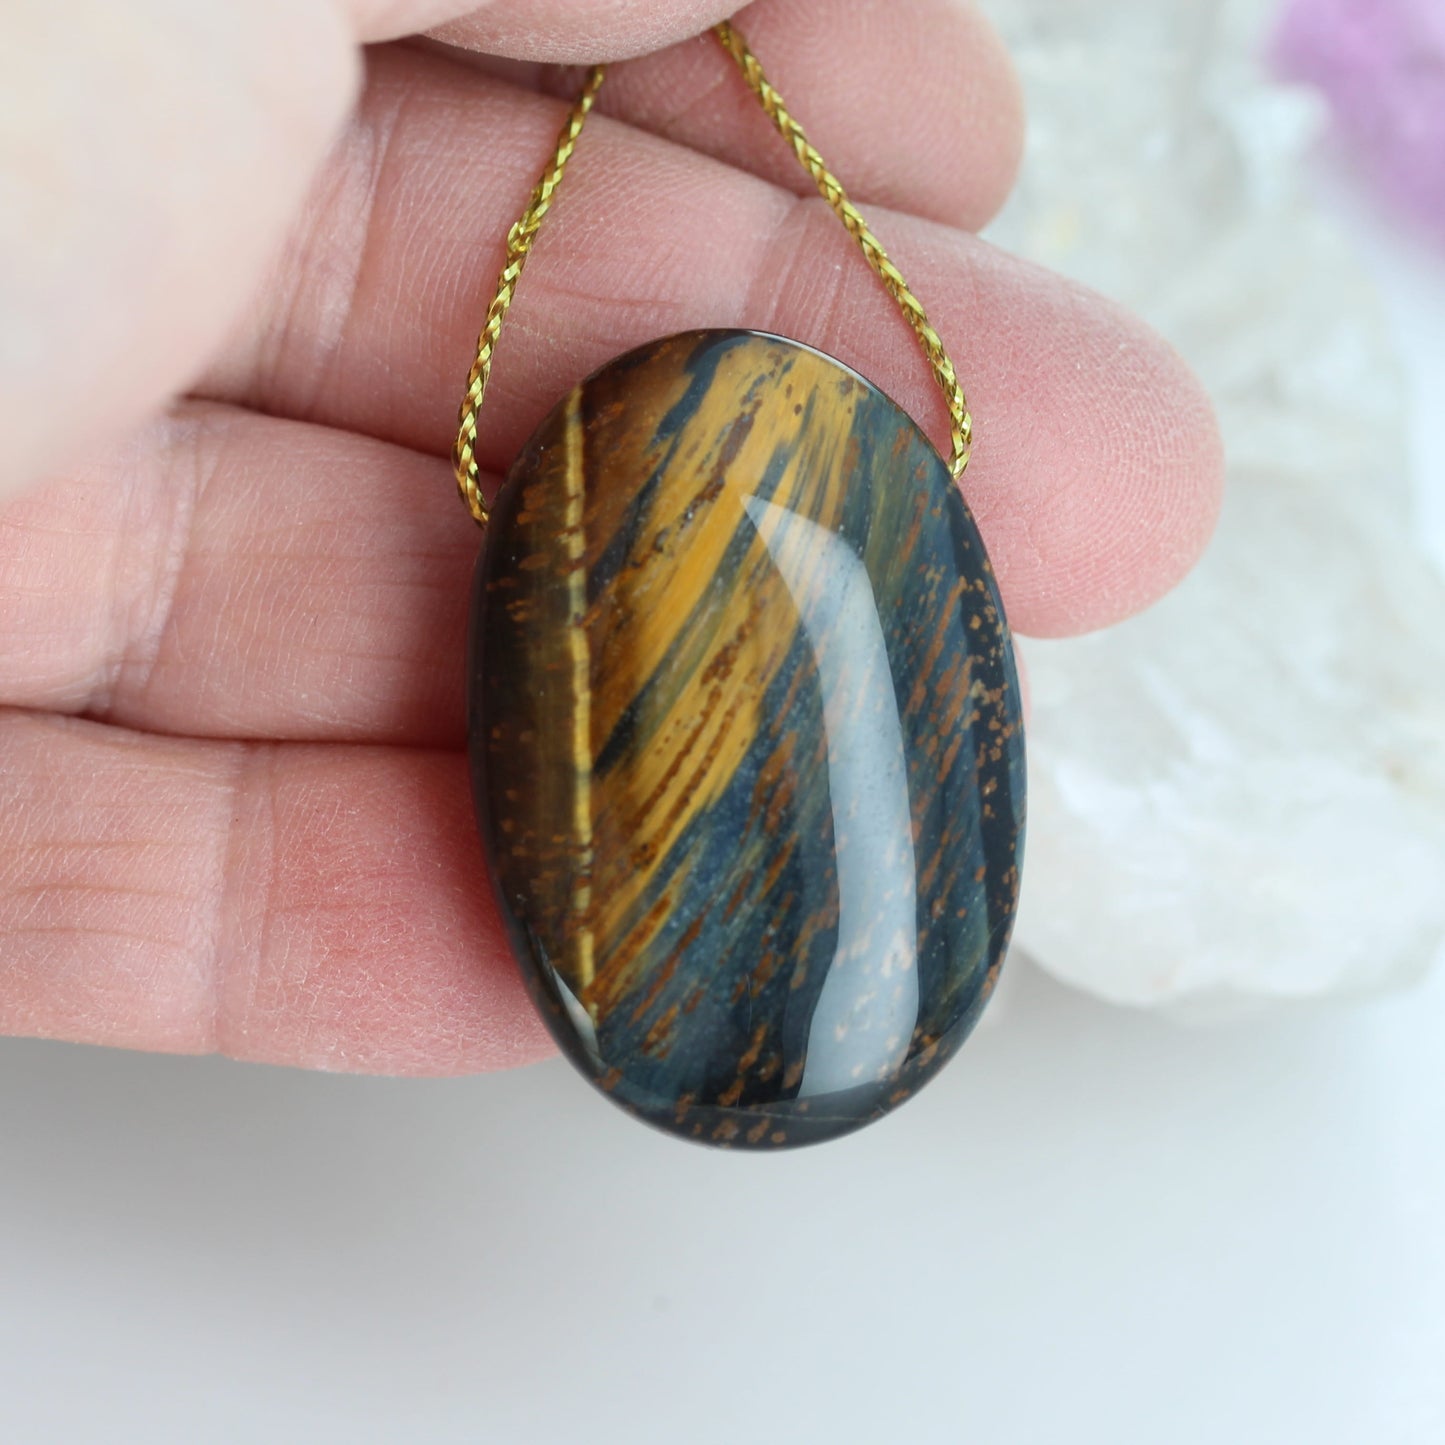 Dramatic Blue and Golden Tigereye Pendant Oval Shape Component